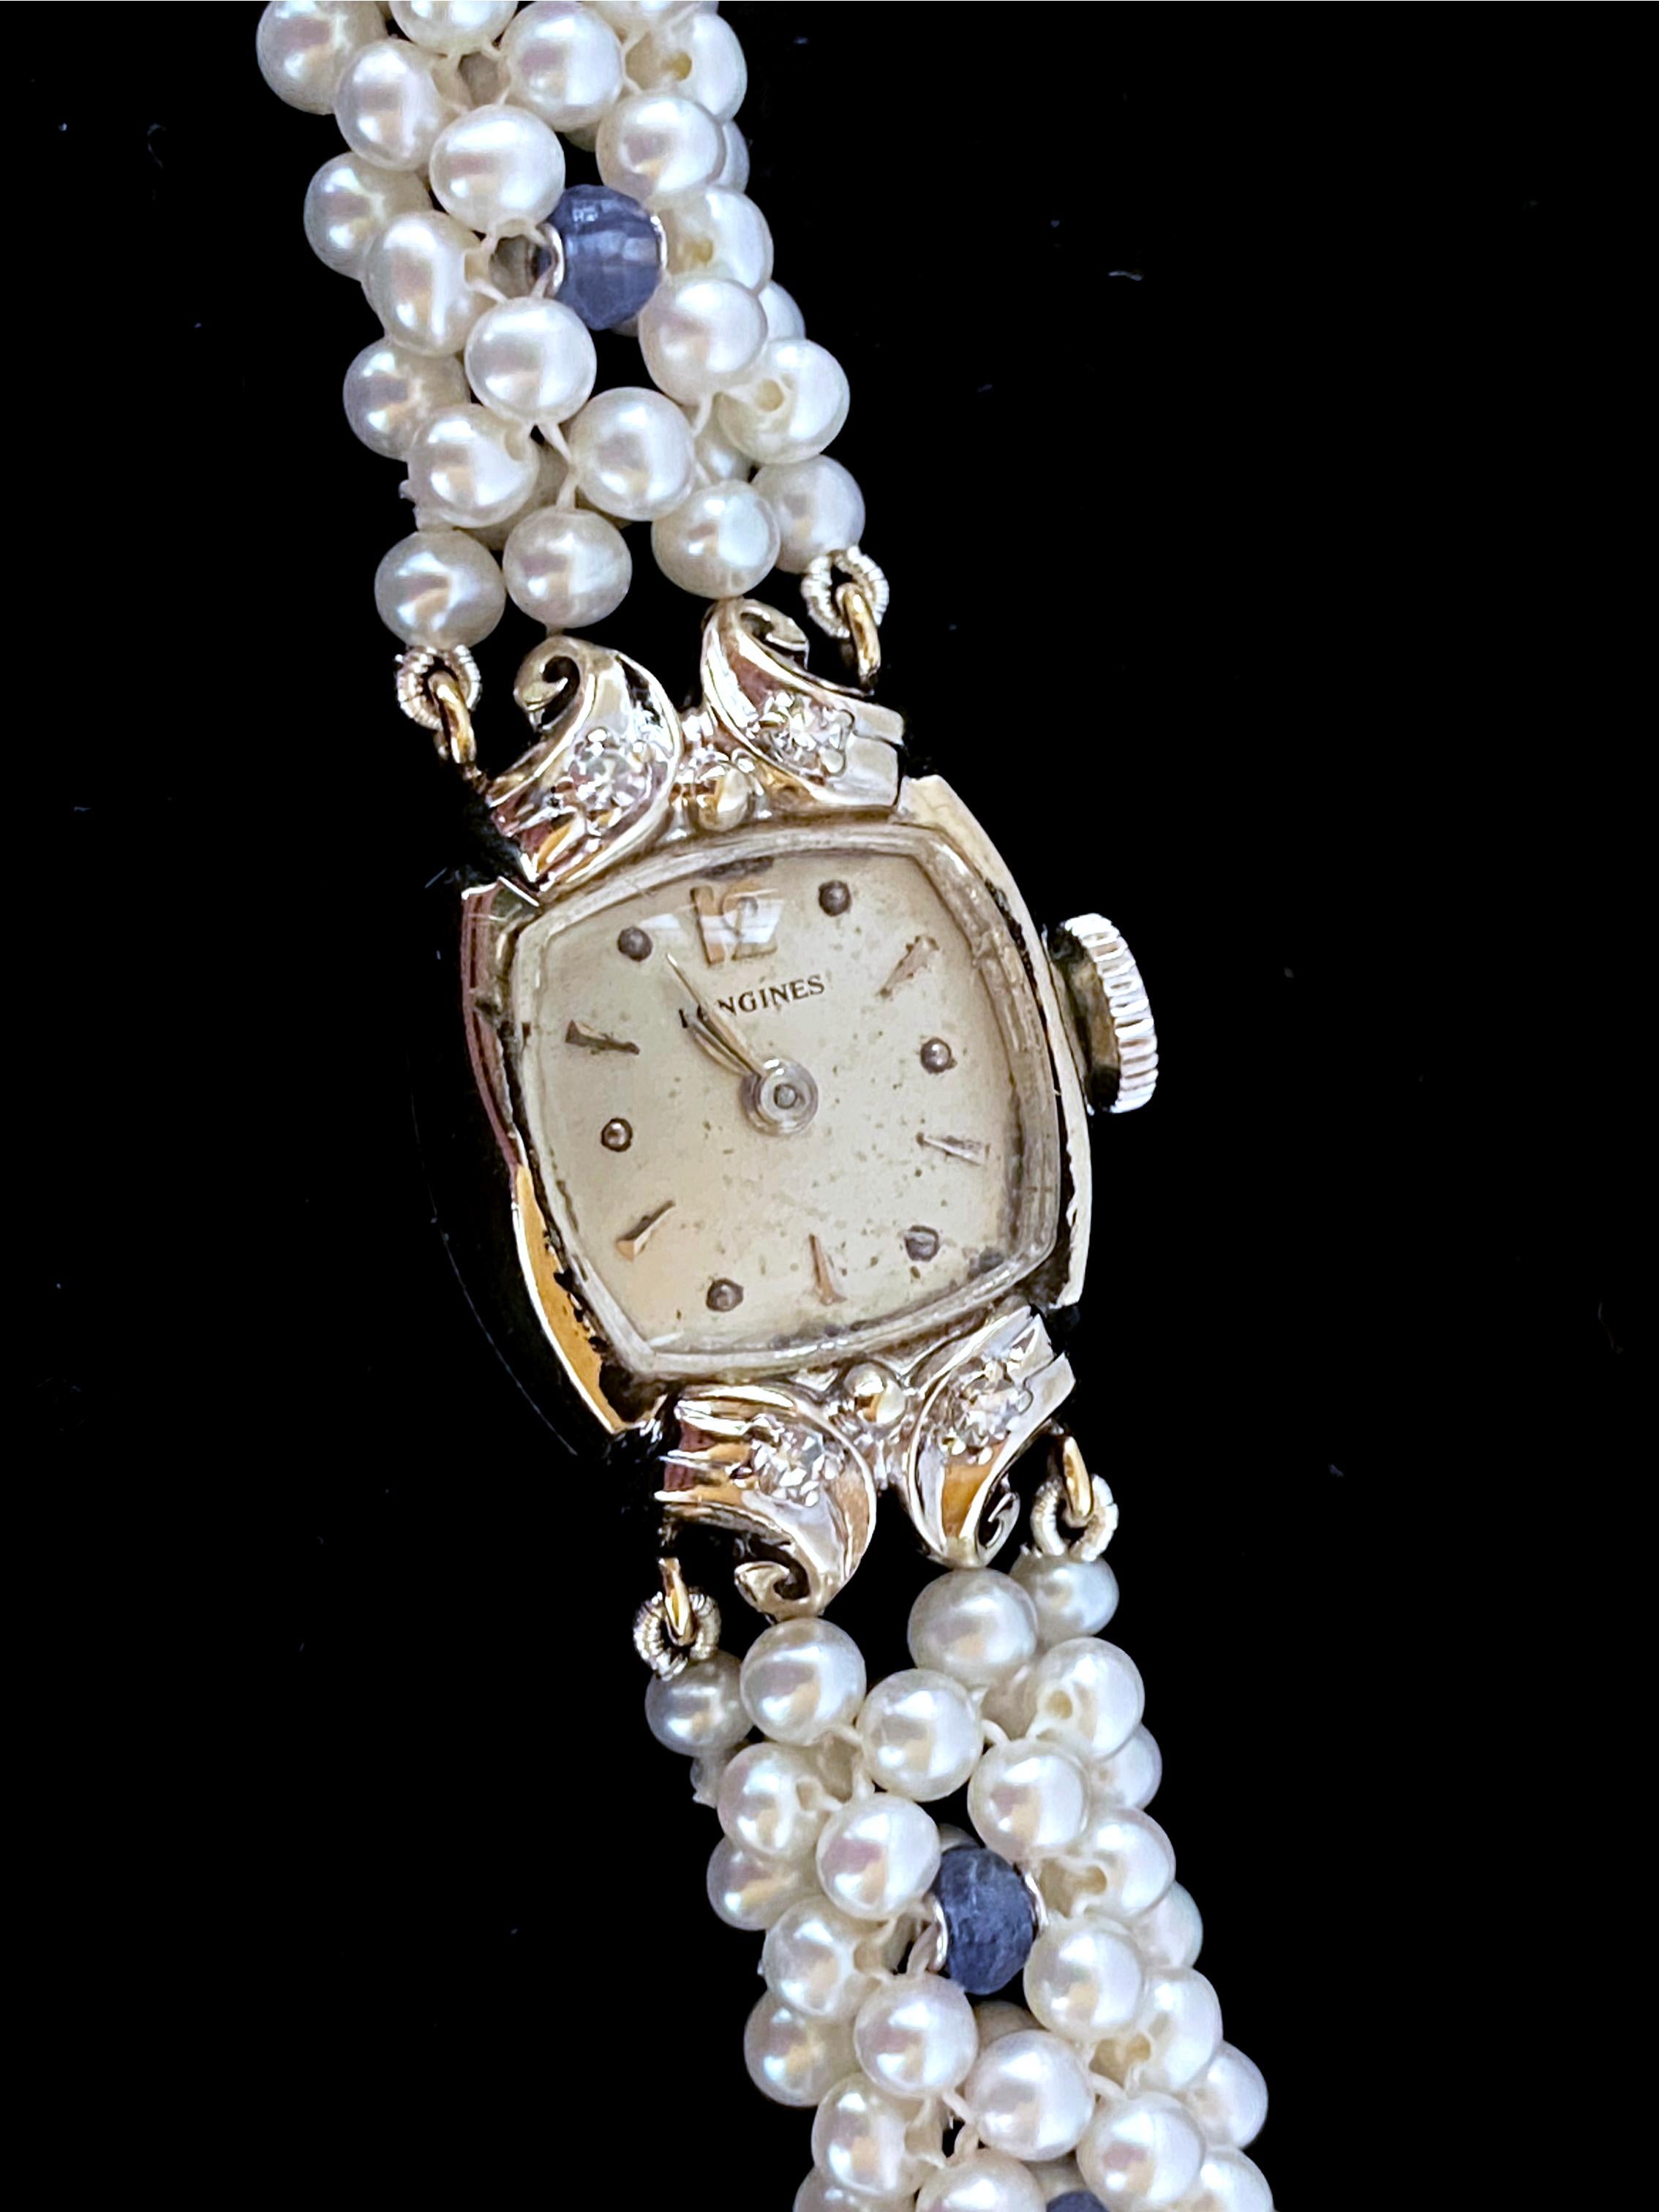 Antique Cushion Cut Marina J. Antique 14k Diamond Encrusted Watch with Blue Sapphire and Pearl Band